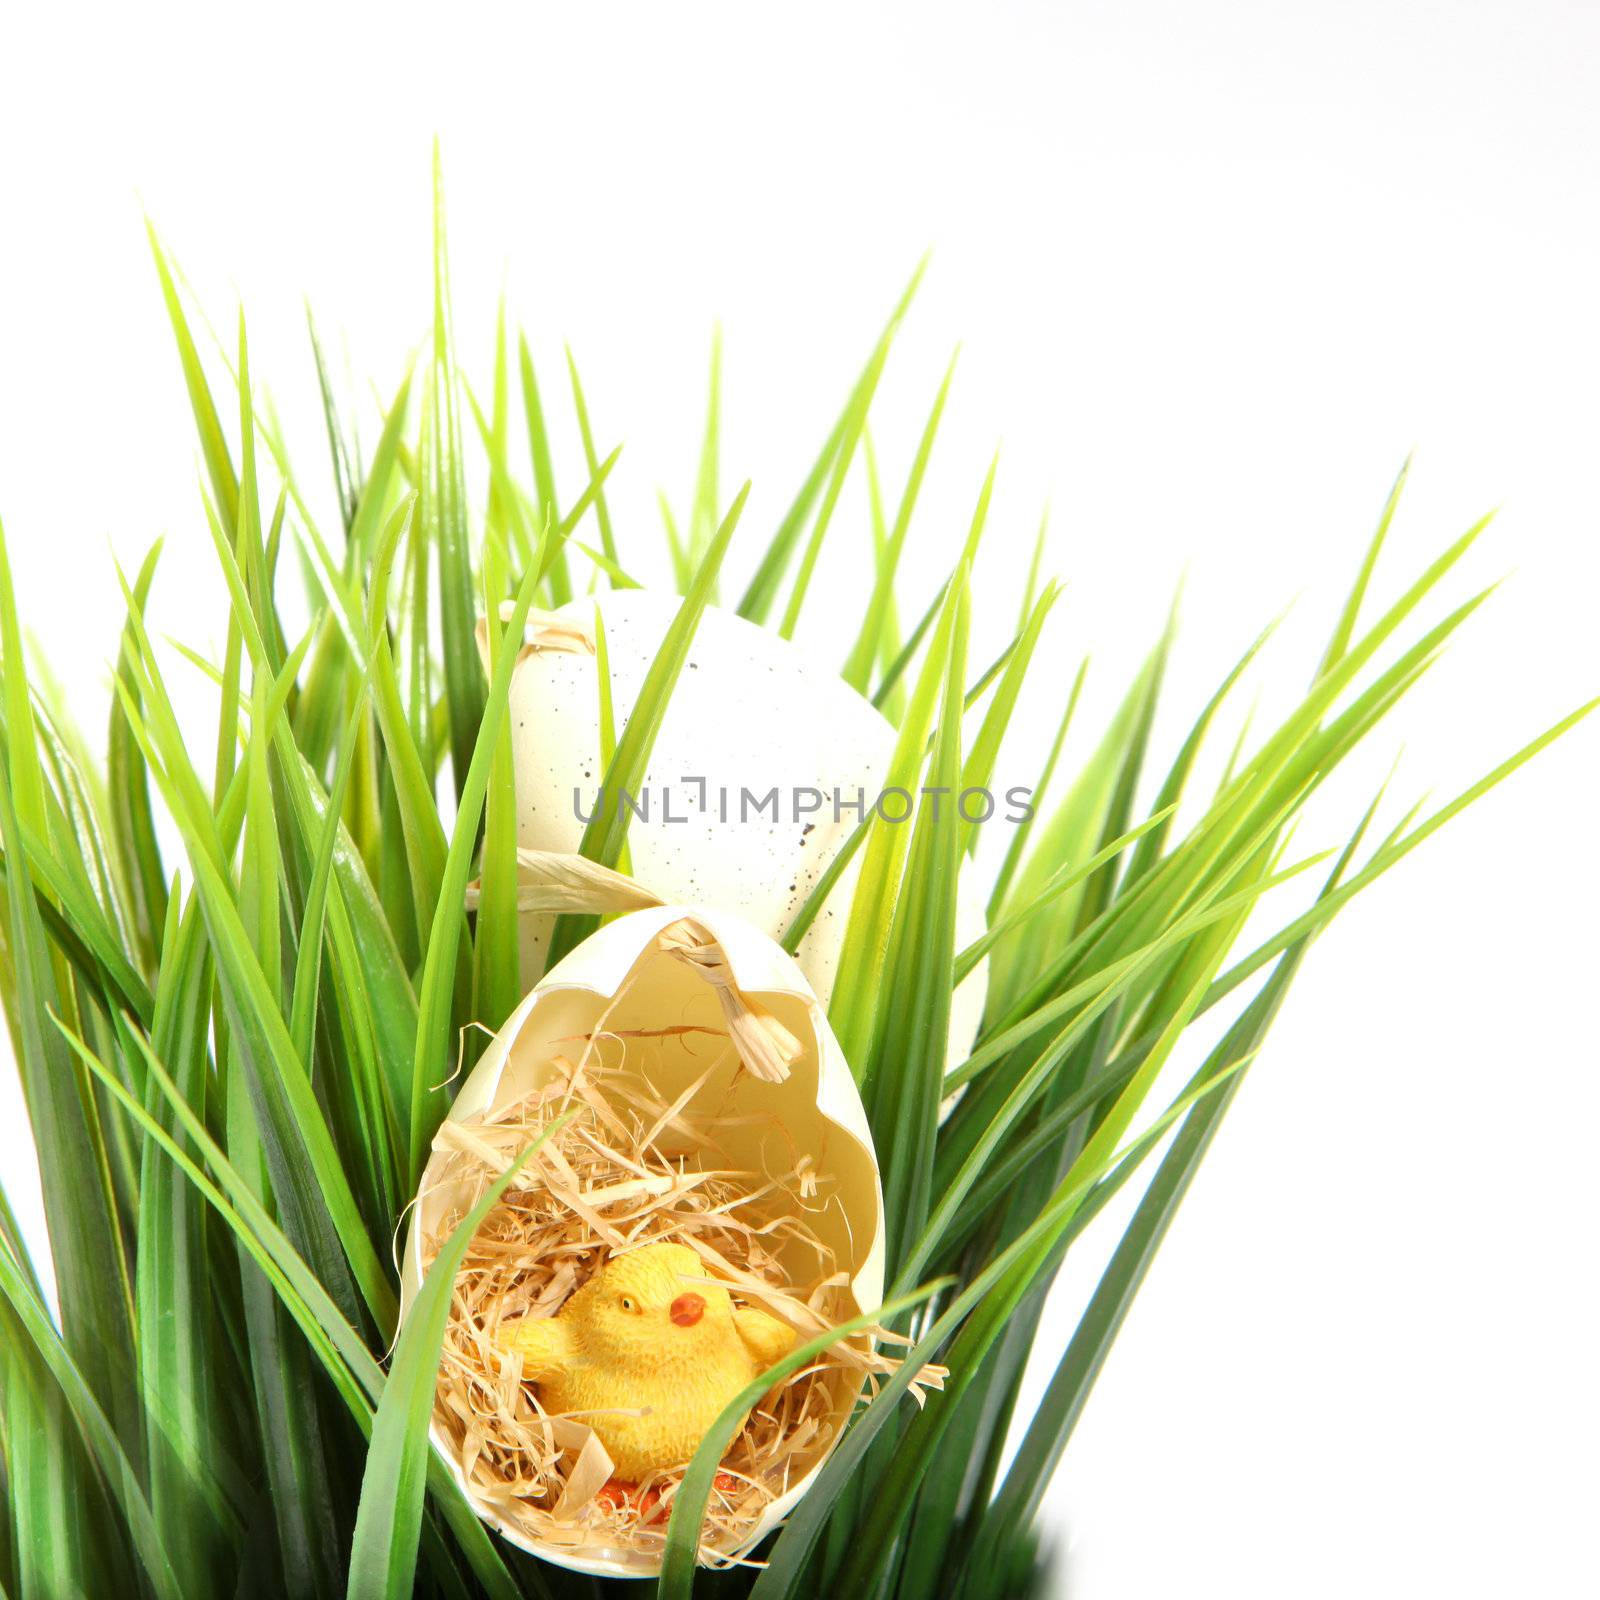 Cute yellow fluffy little Easter chick sitting on straw inside a cracked eggshell cushioned in fresh green grass isolated on white